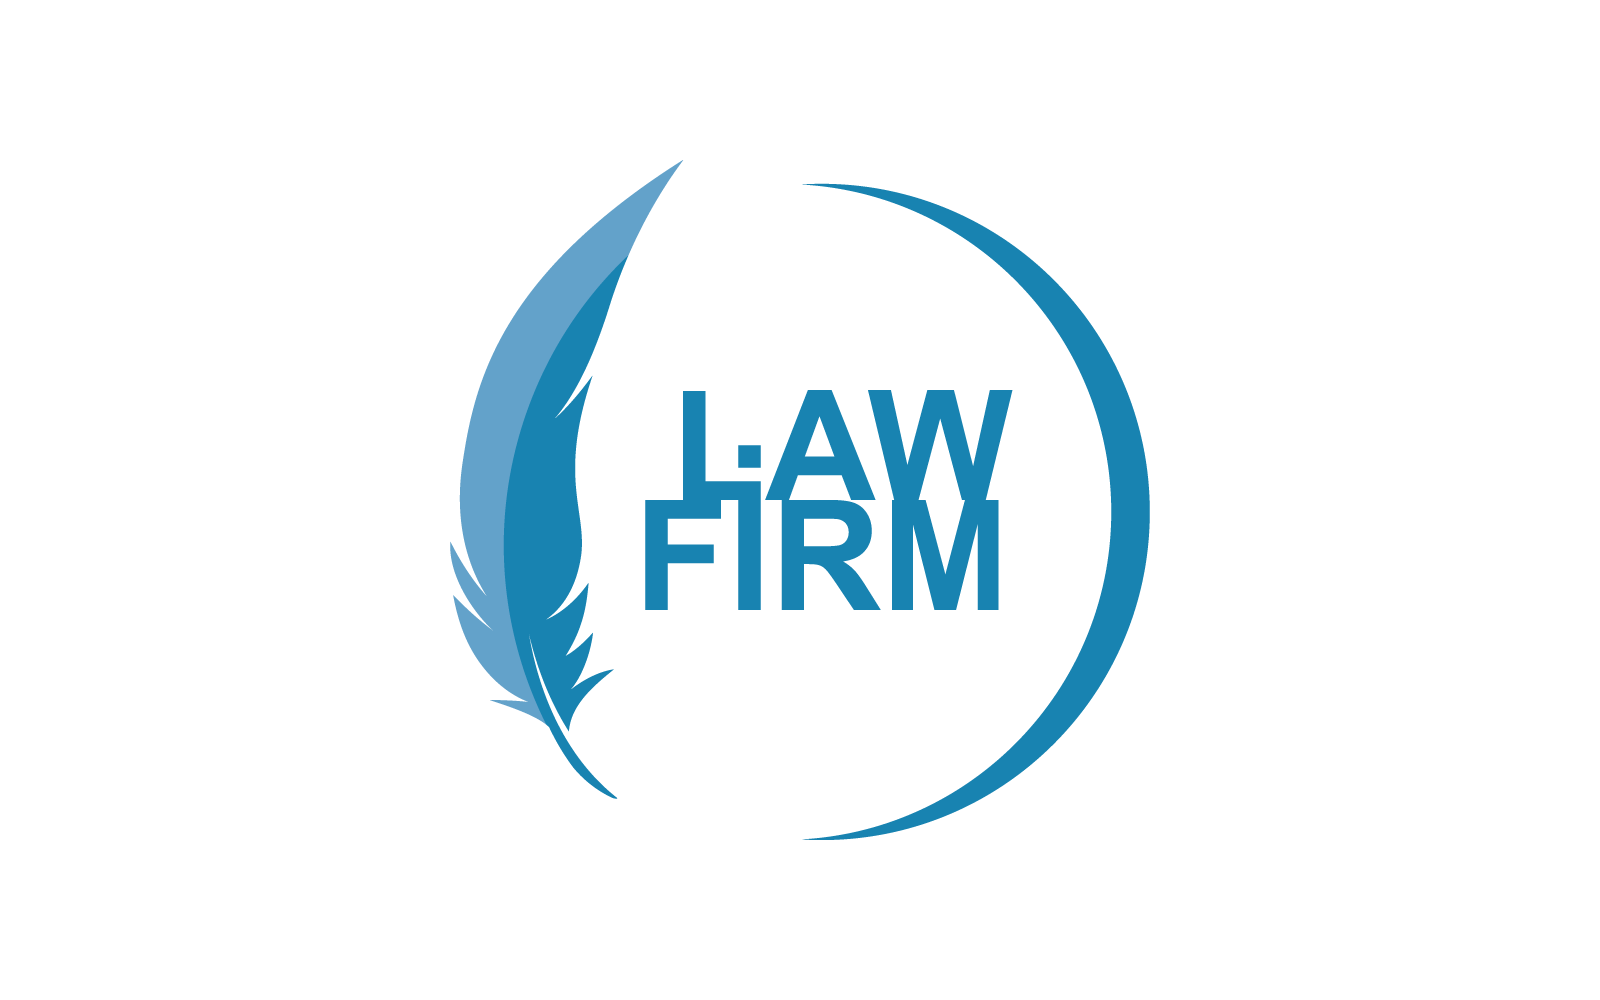 Law firm Feather illustration logo vector template